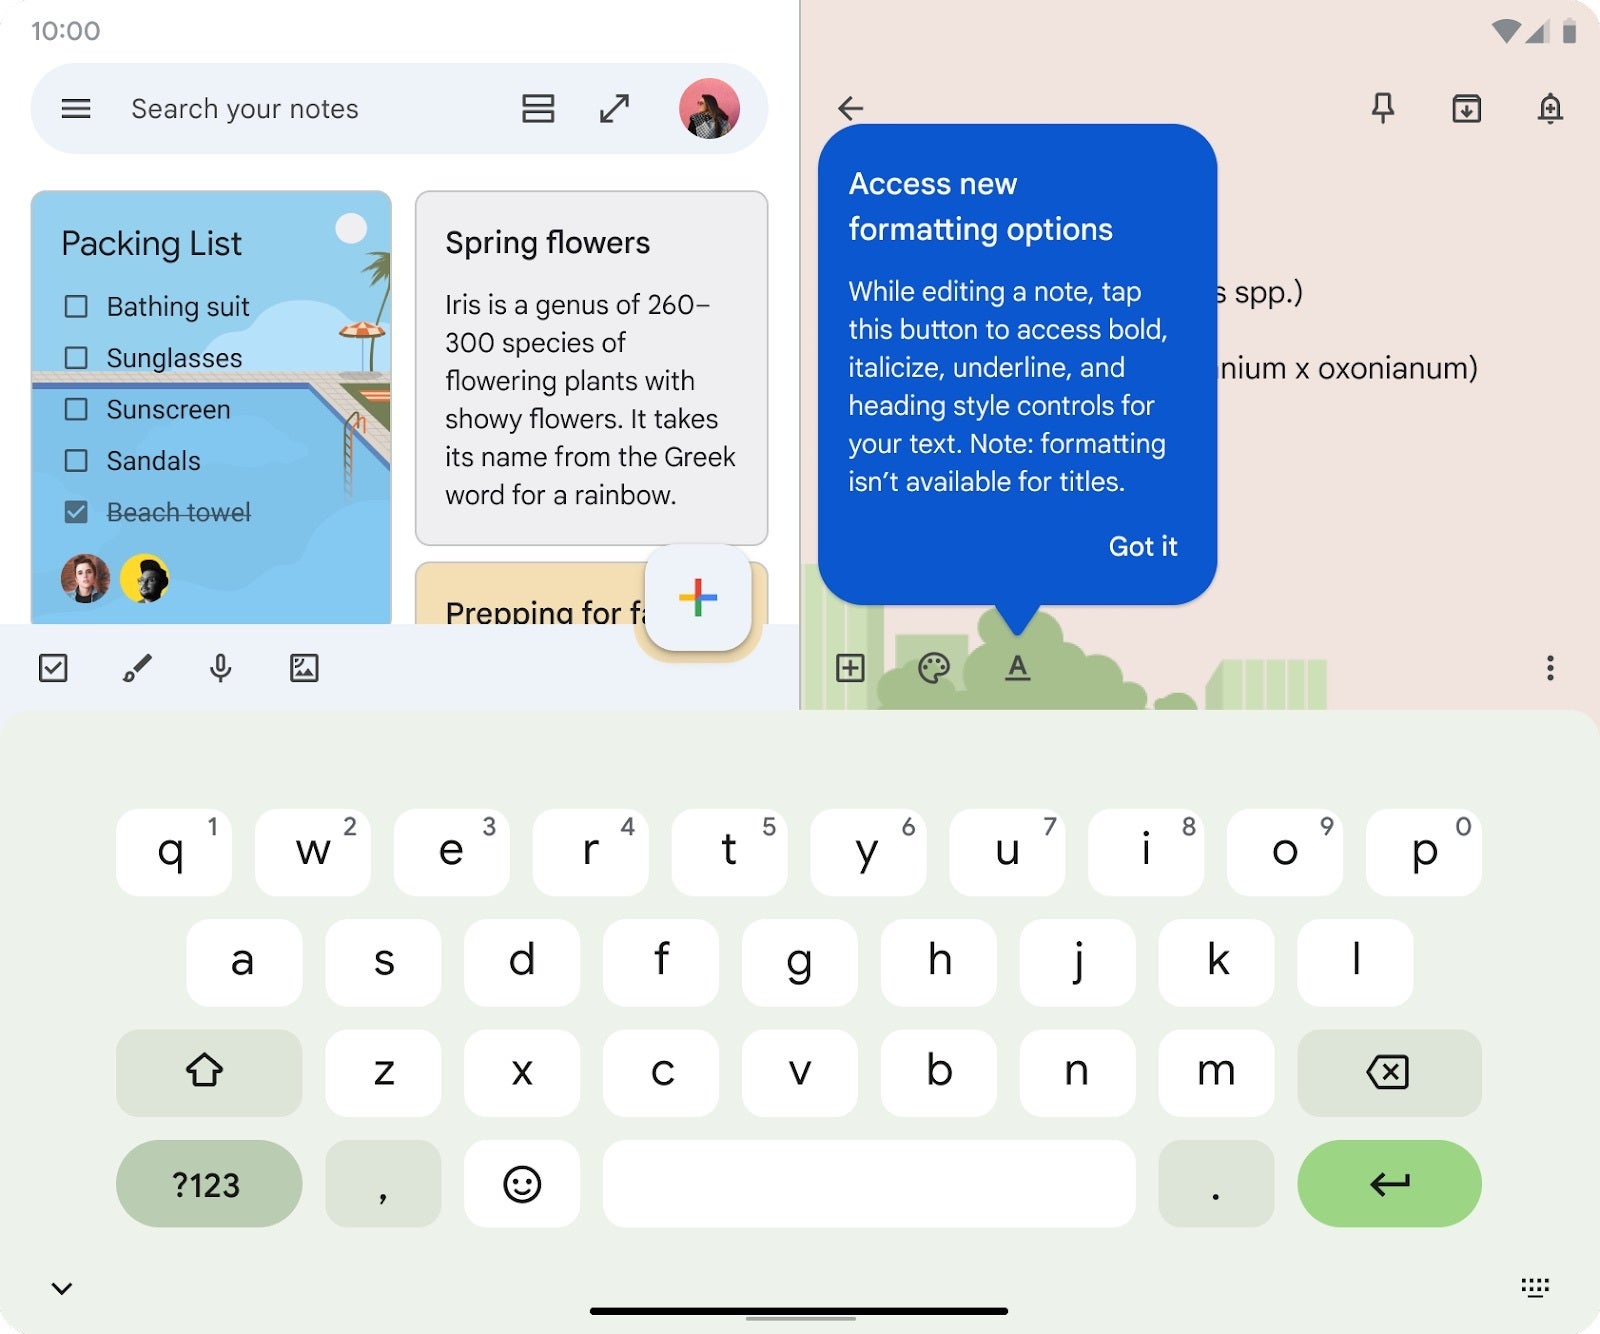 Source - Google - Google announces rich text formatting for Keep Notes on Android